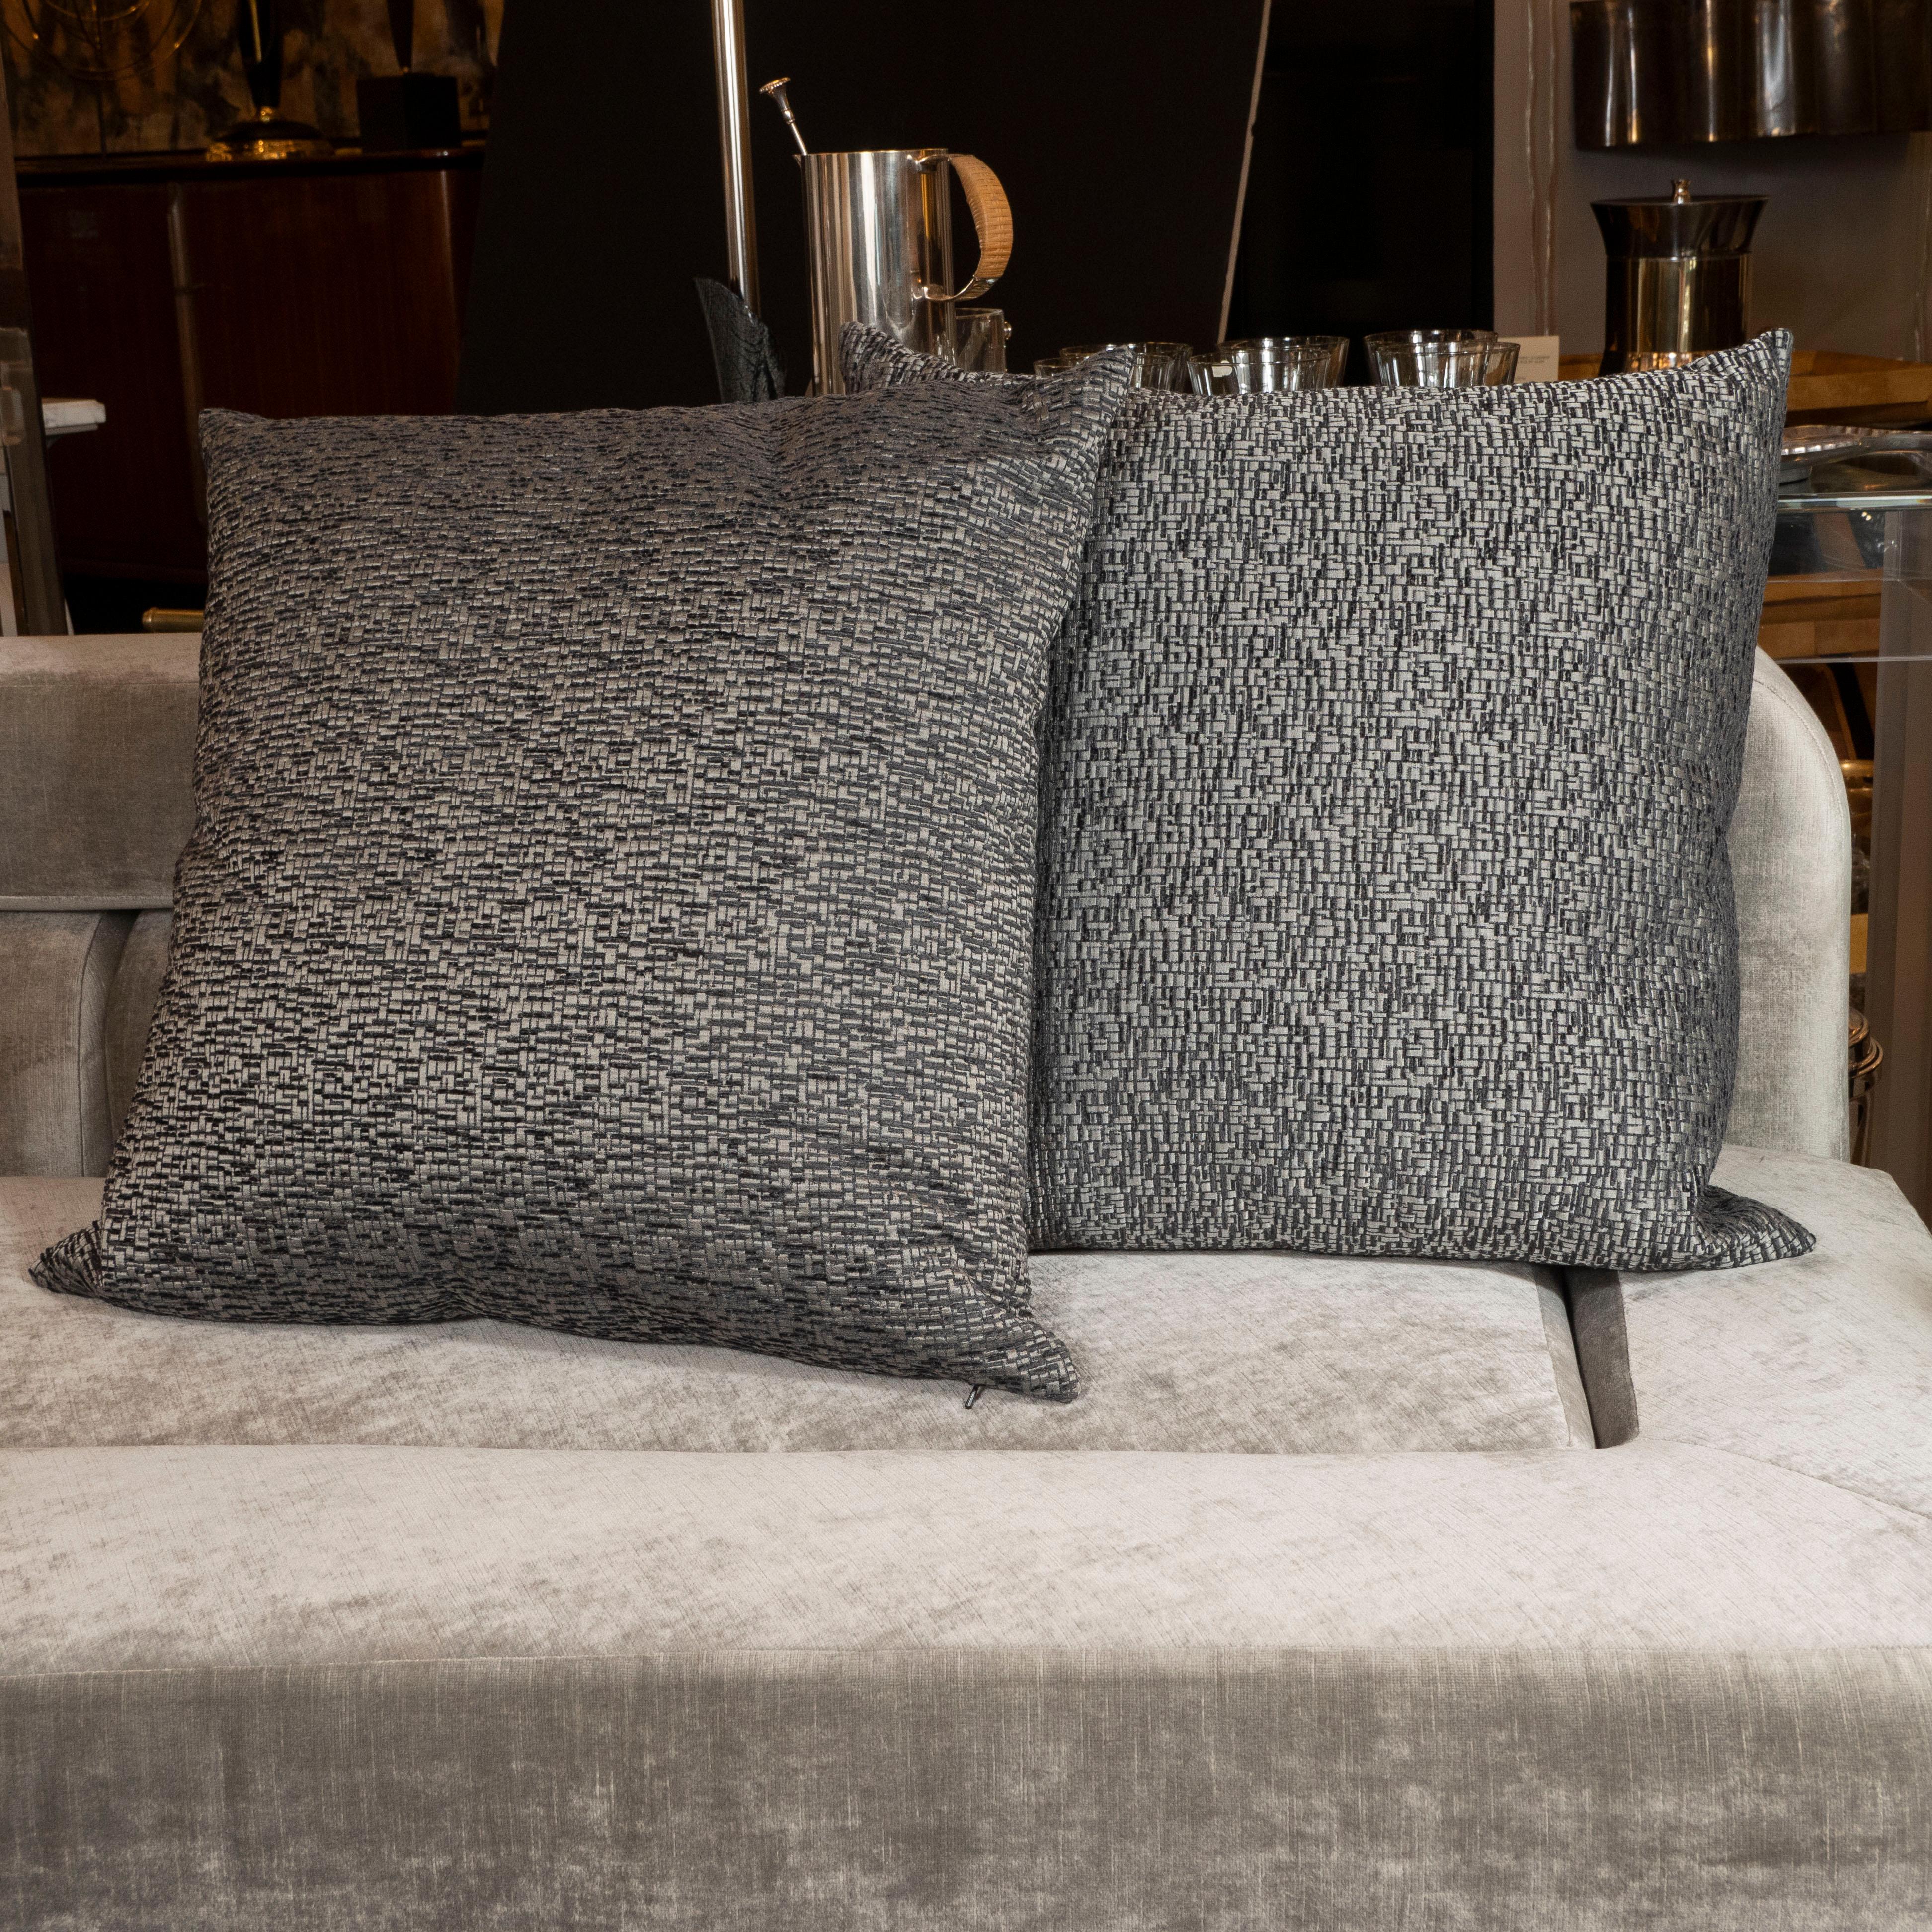 Pair of Modernist Pillows with Rectilinear Print in Charcoal and Slate Gray In New Condition For Sale In New York, NY